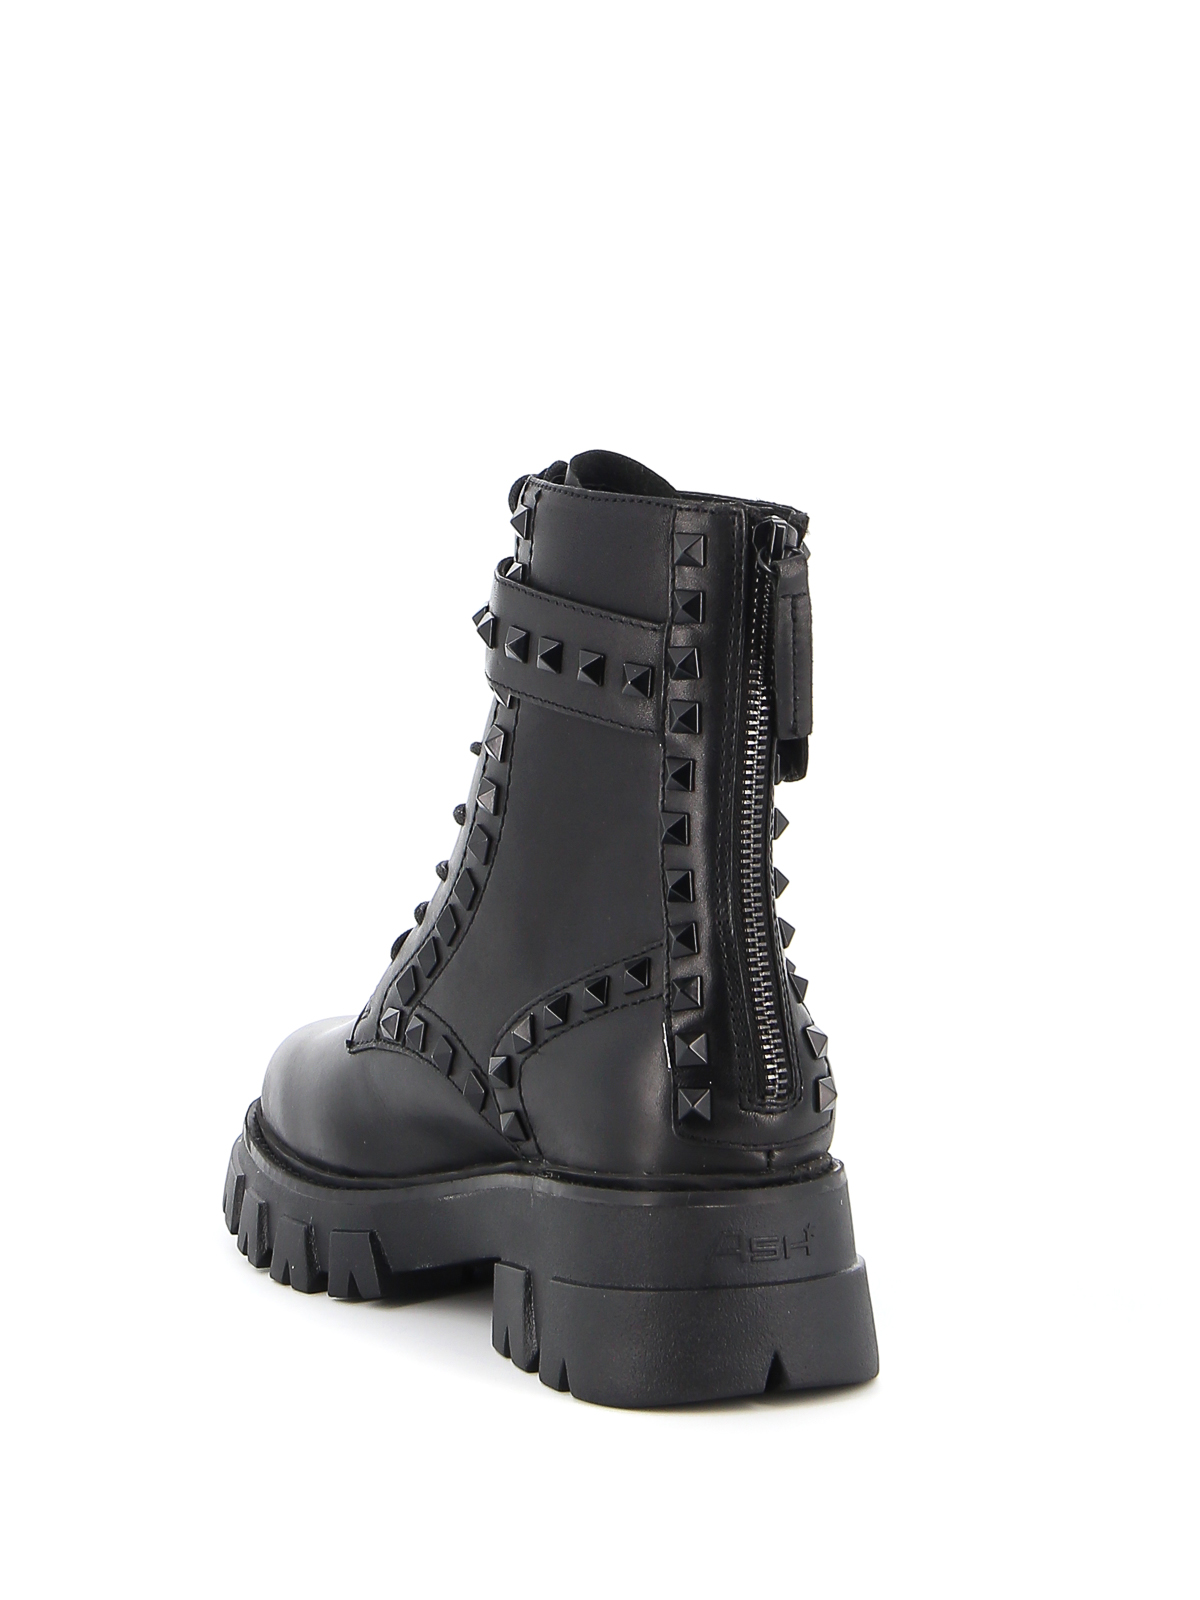 combat boots with studs